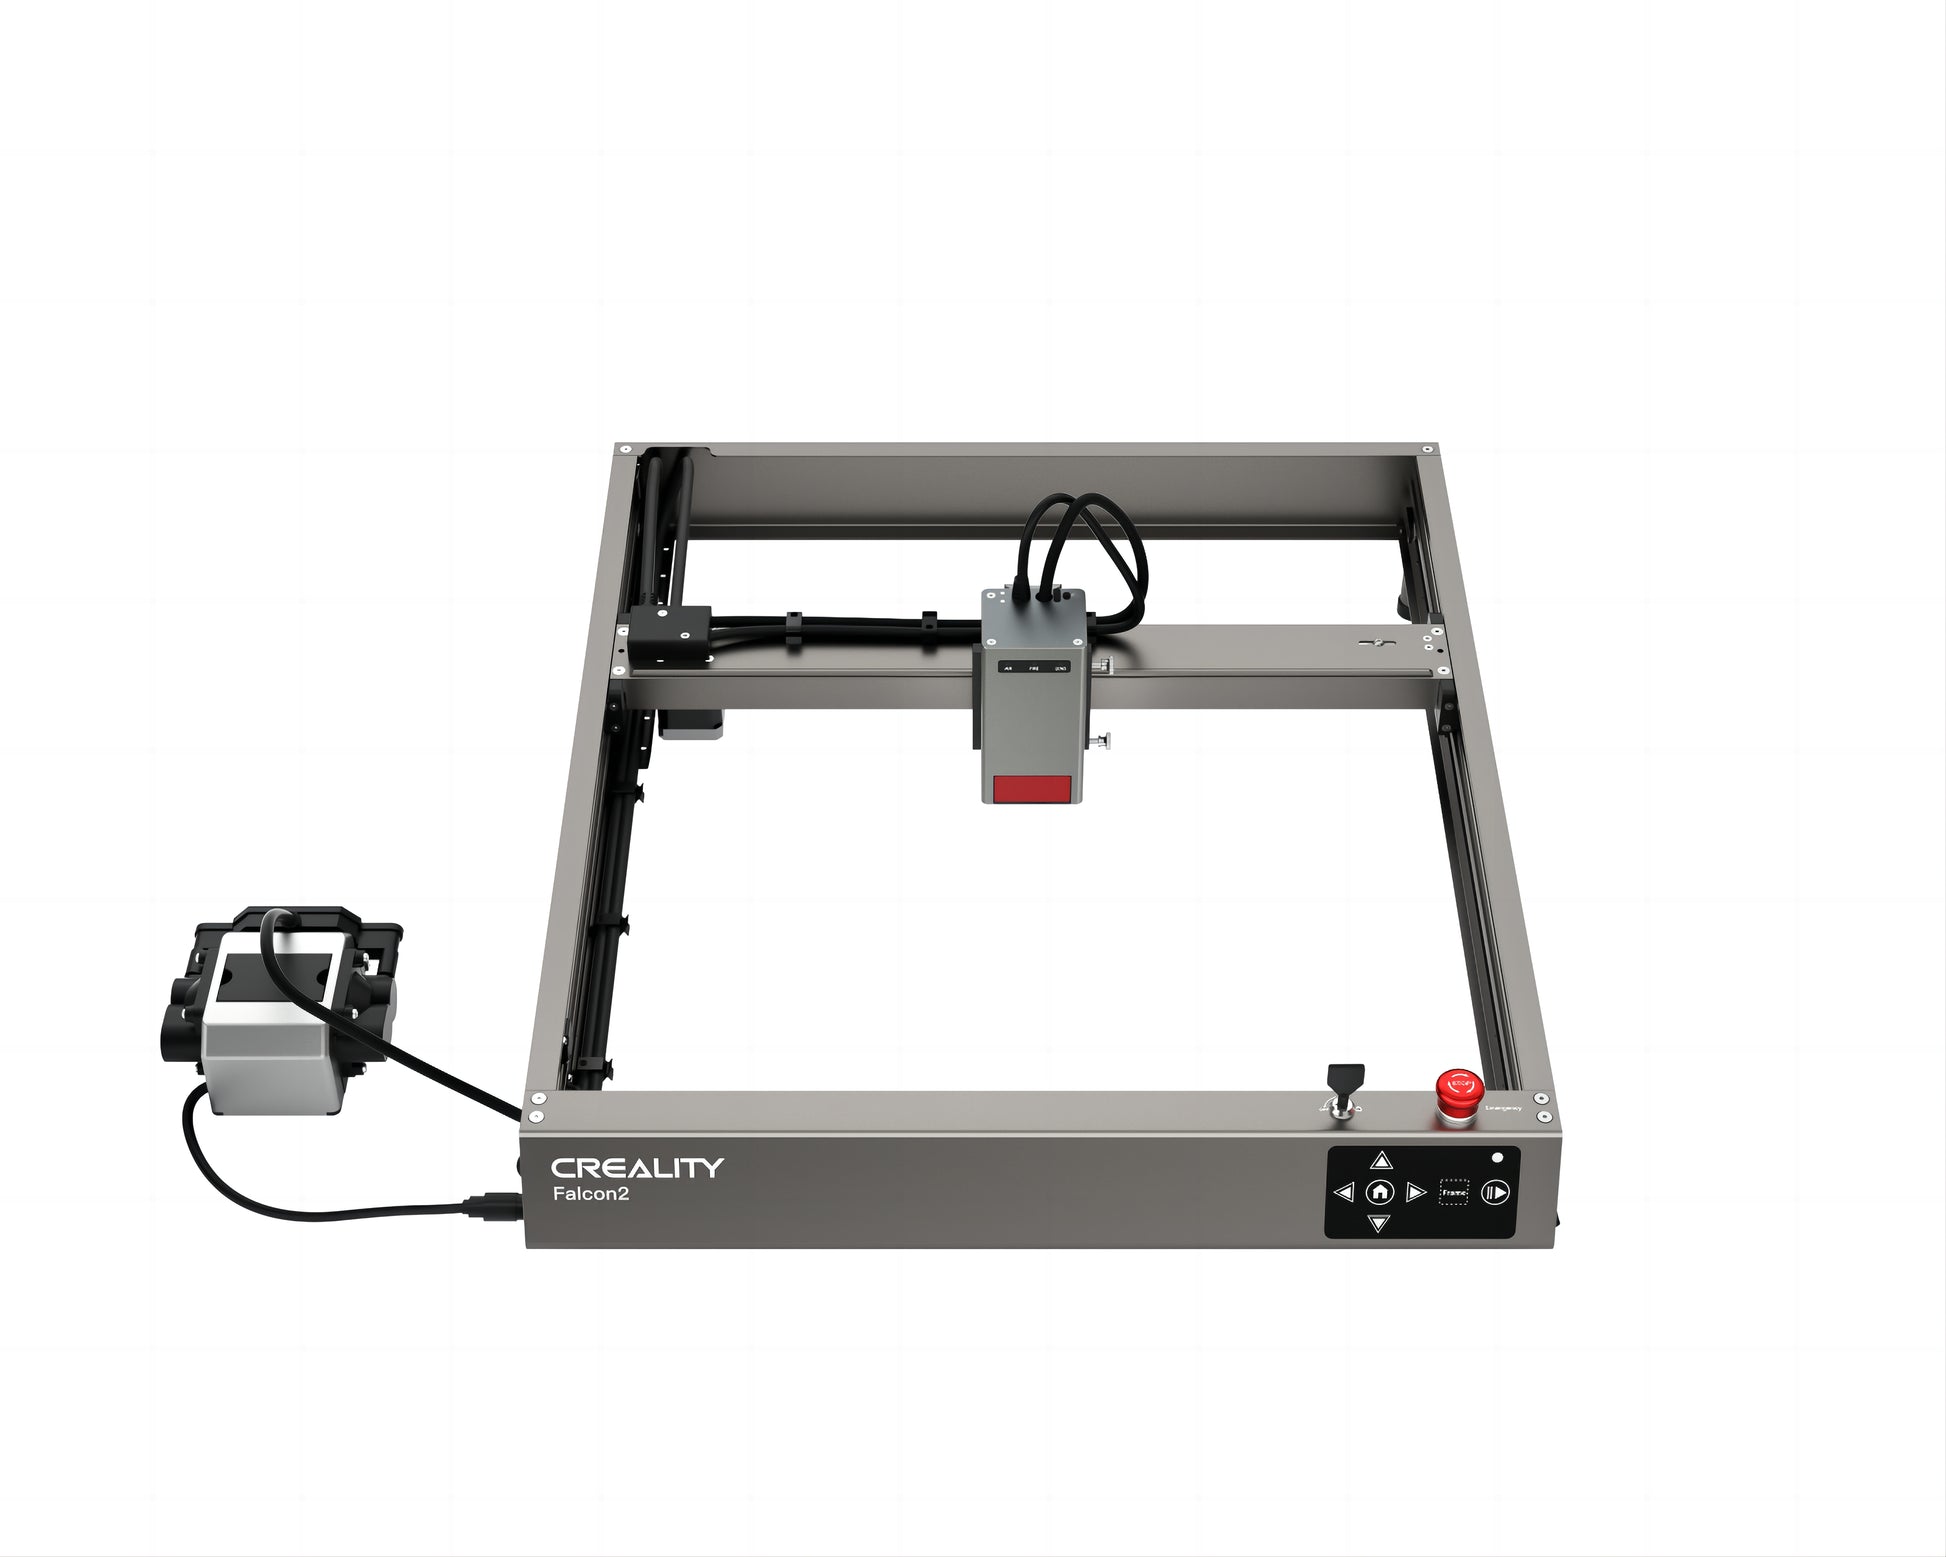 Creality Falcon2 22W Upgraded Laser Engraver DIY with New Integrated Air  Assist